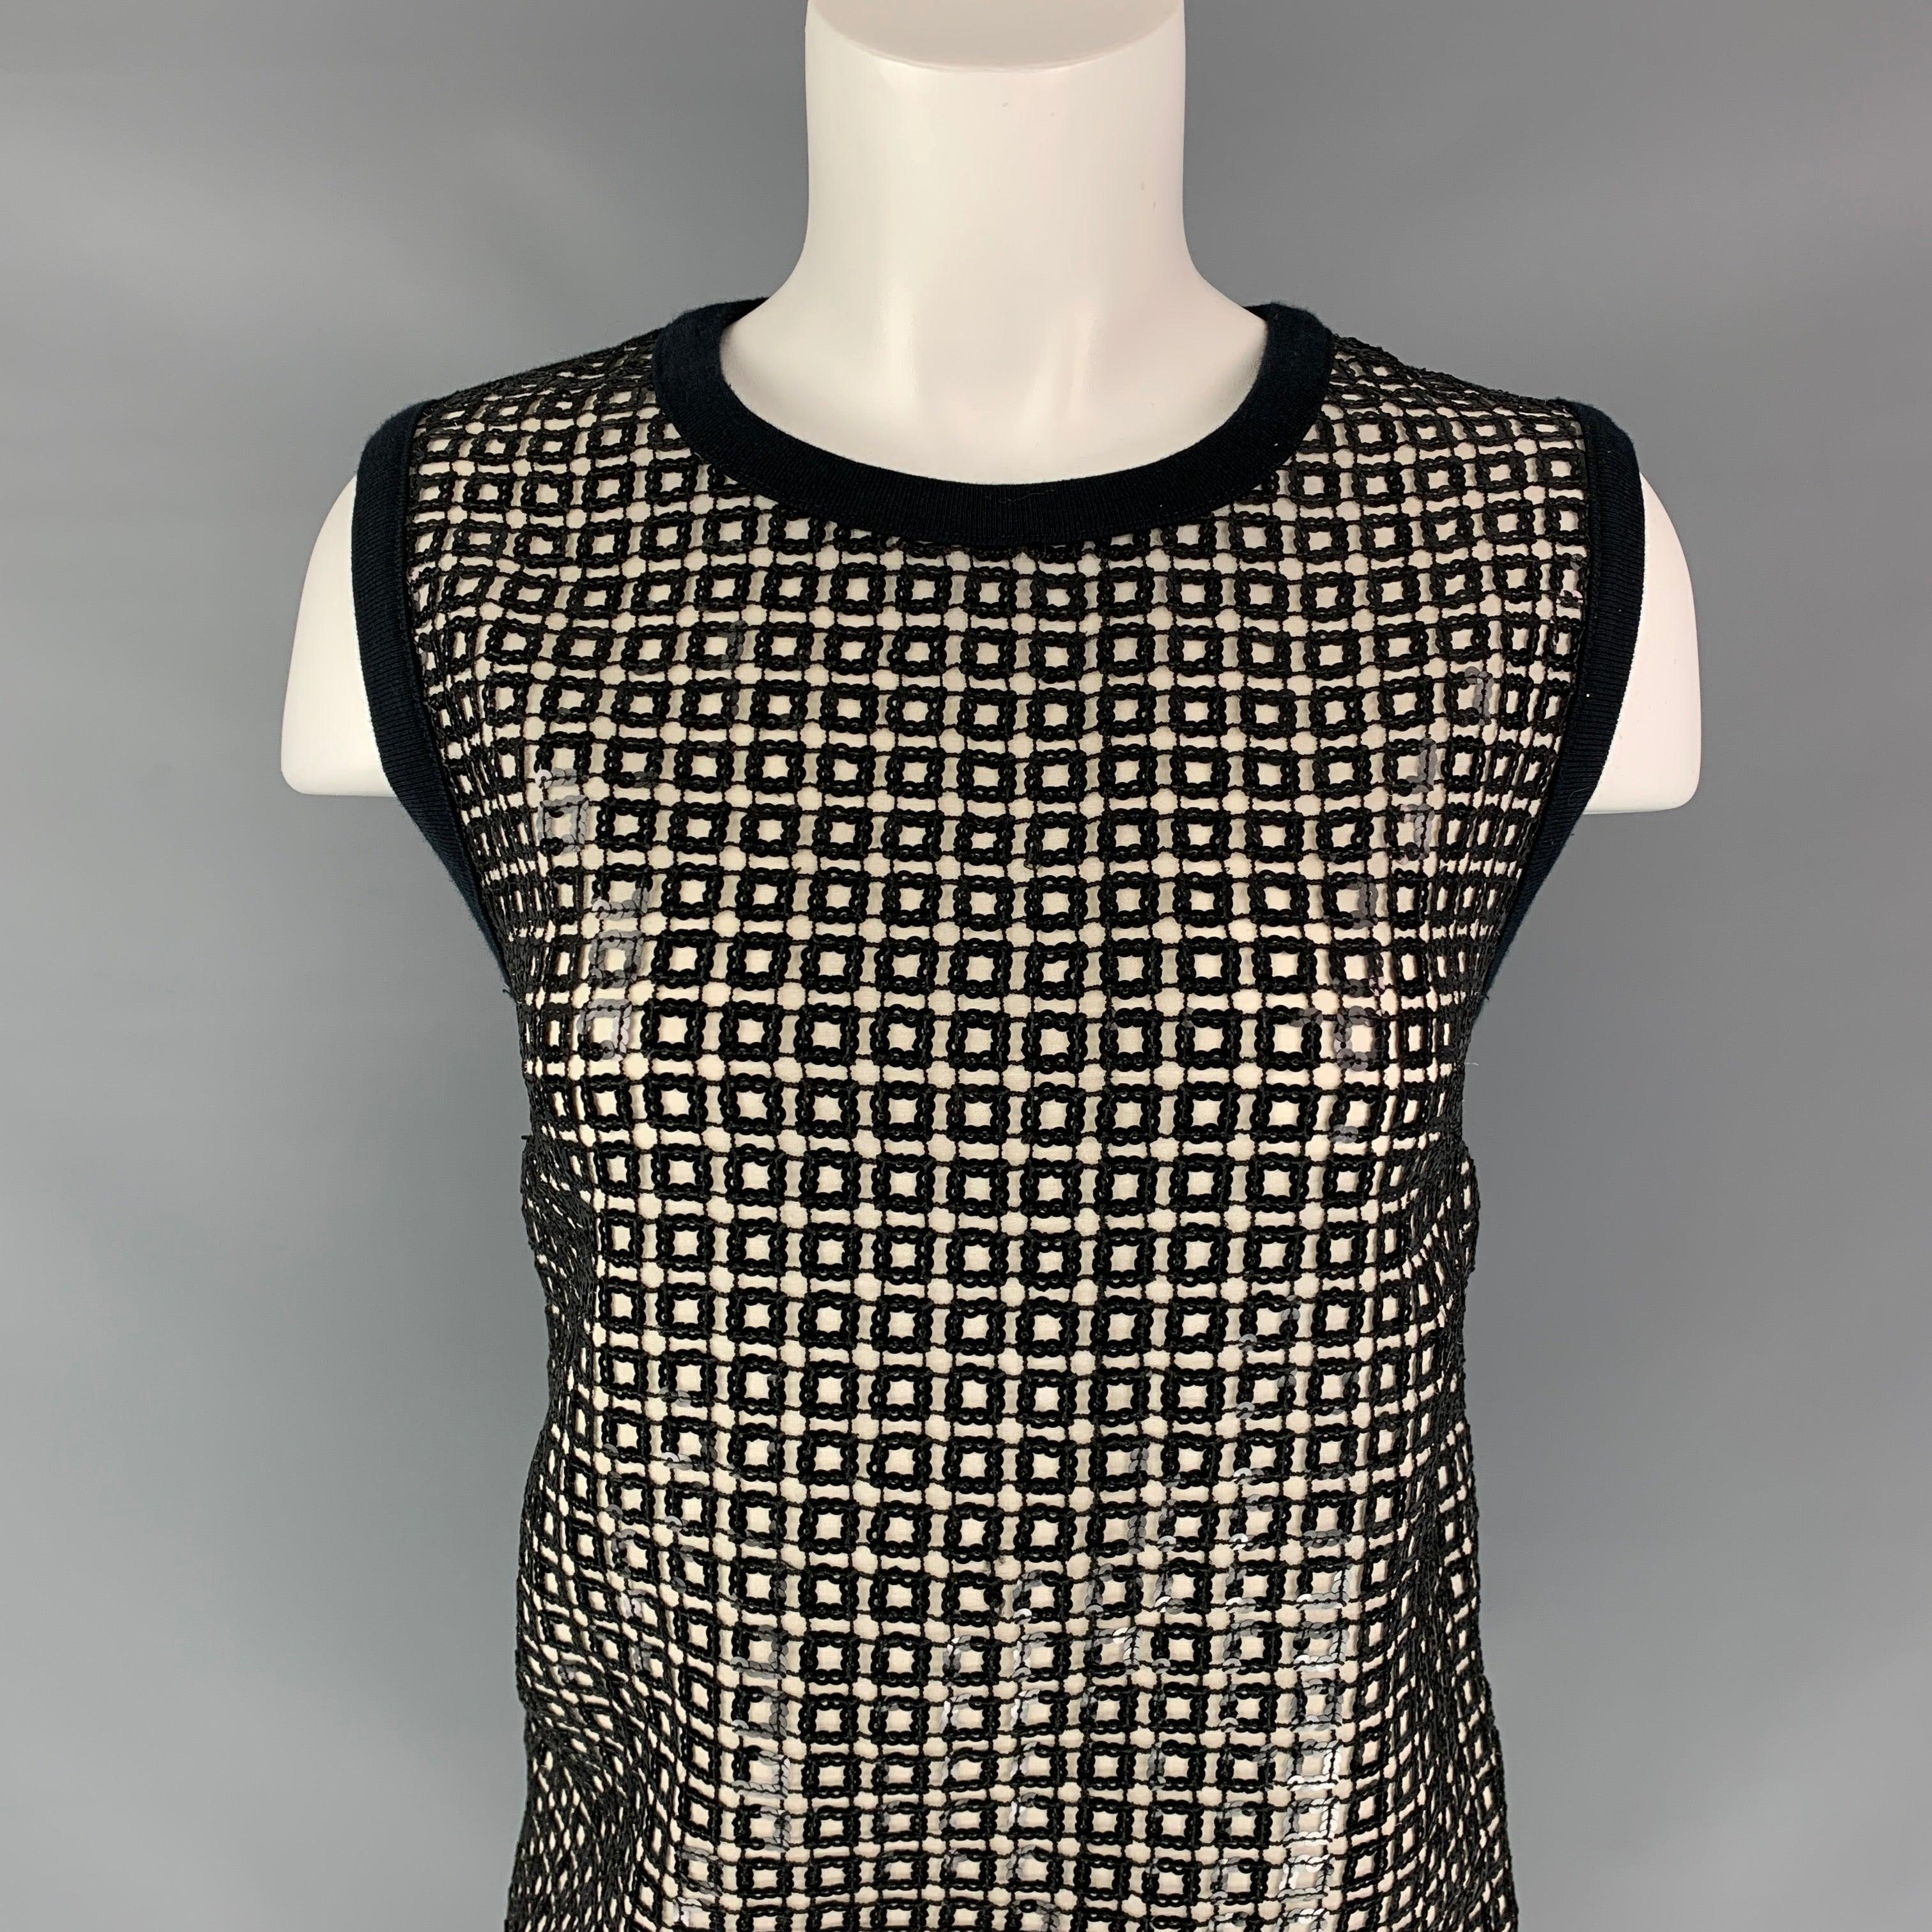 GIAMBATTISTA VALLI dress top comes in a black polyester with a cotton back featuring sequined details, sleeveless, and a crew-neck.
Very Good
Pre-Owned Condition. 

Marked:   42/S 

Measurements: 
 
Shoulder: 15 inches  Bust: 36 inches  Length: 20